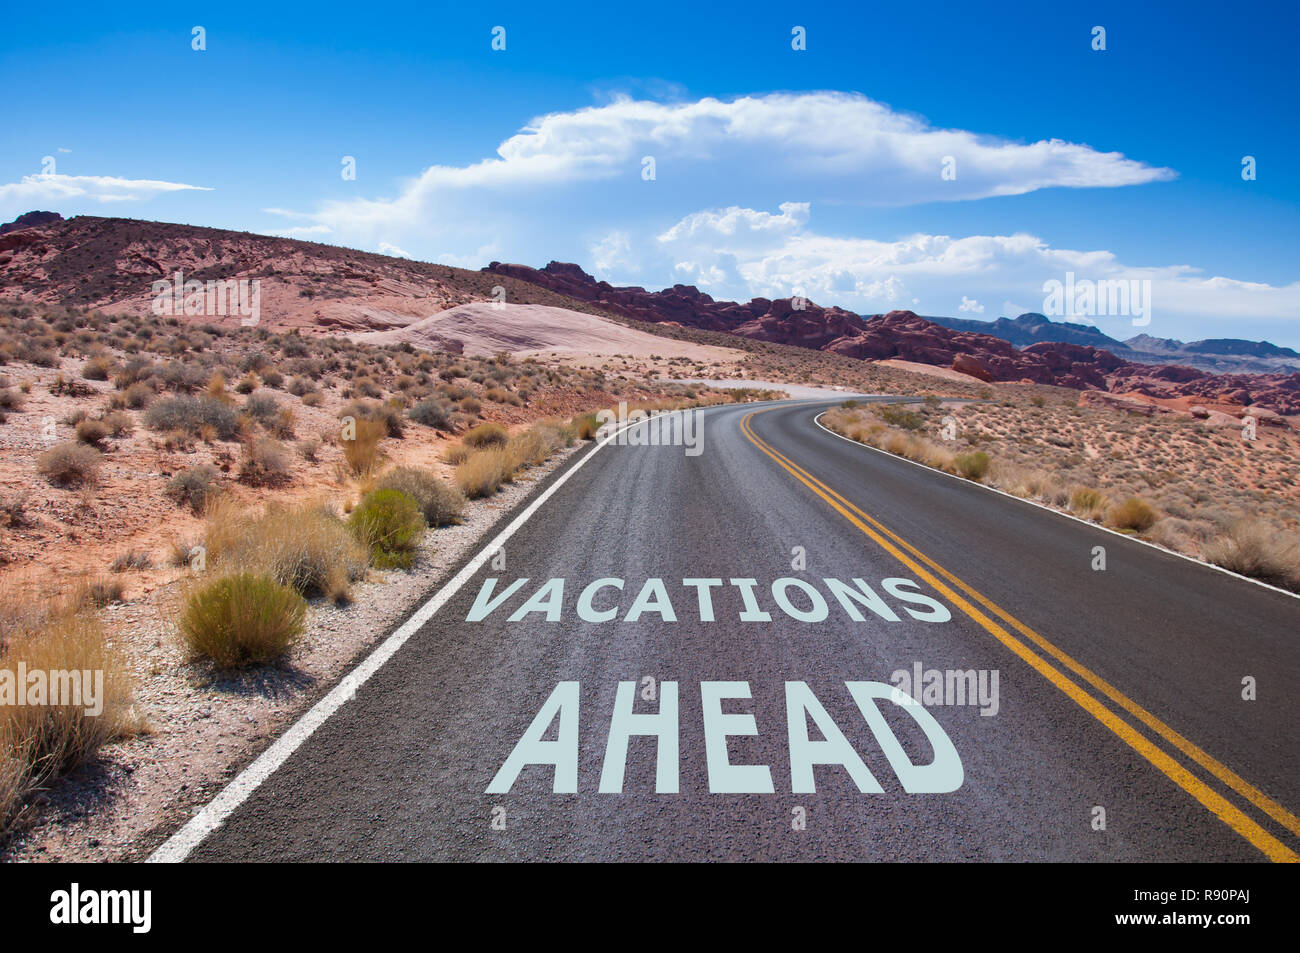 The text 'Vacations ahead' written on a empty road in the desert of Nevada before the street turns right Stock Photo